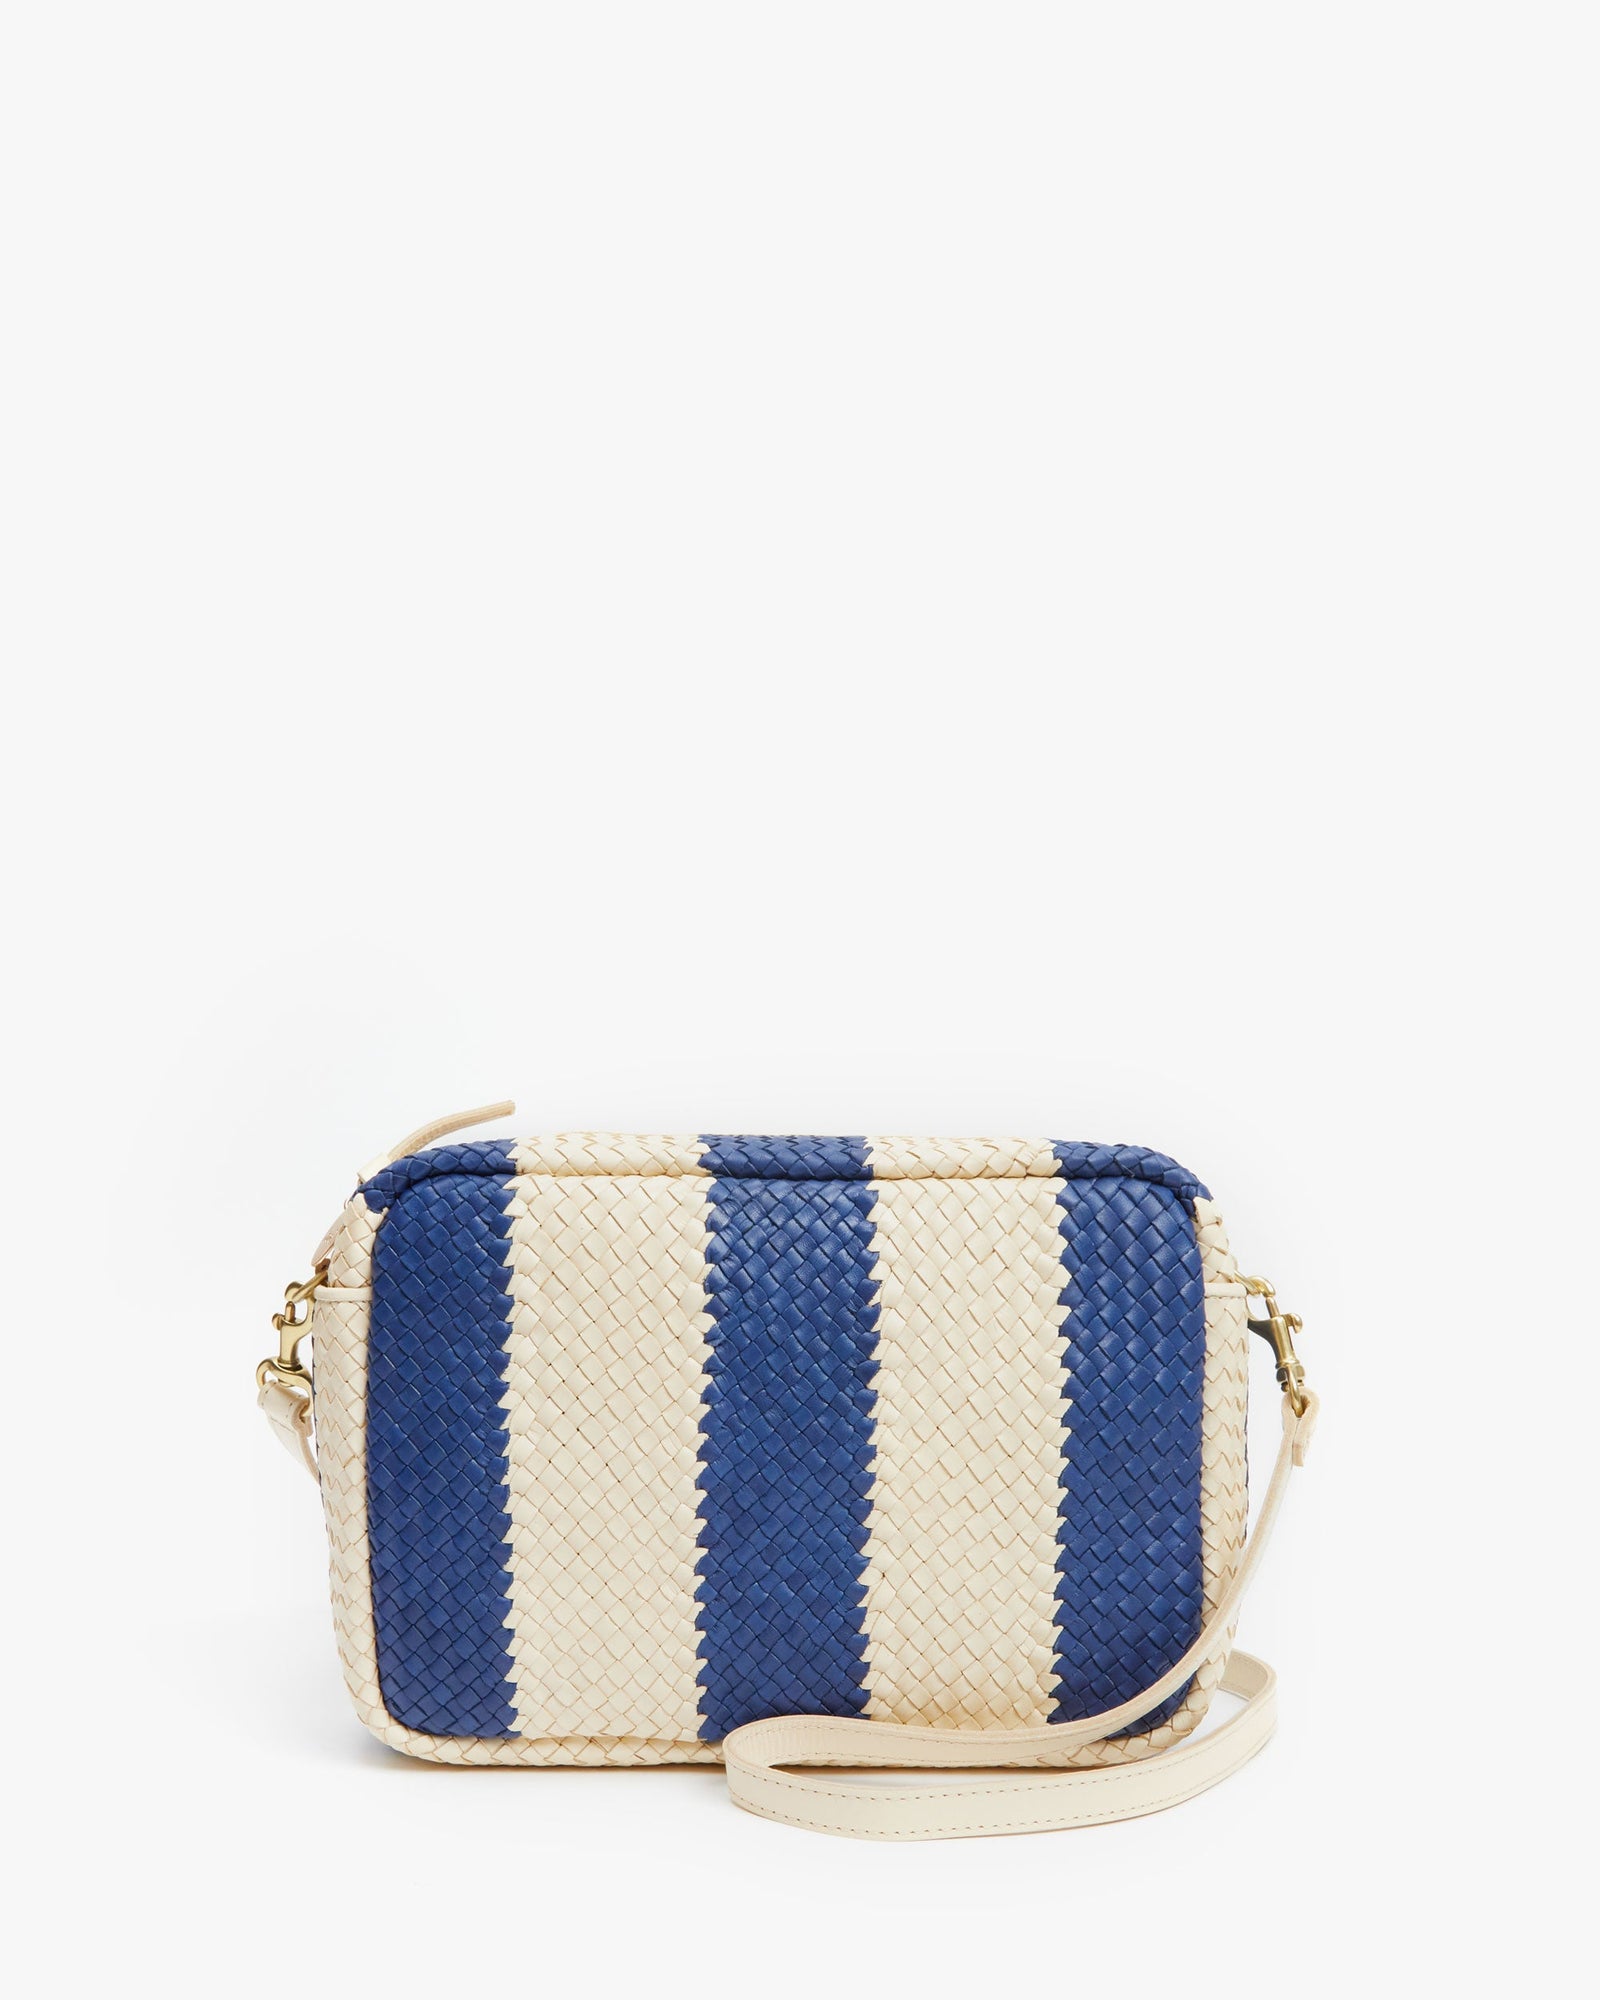 Front View of the Indigo & Cream Woven Racing Stripes Marisol